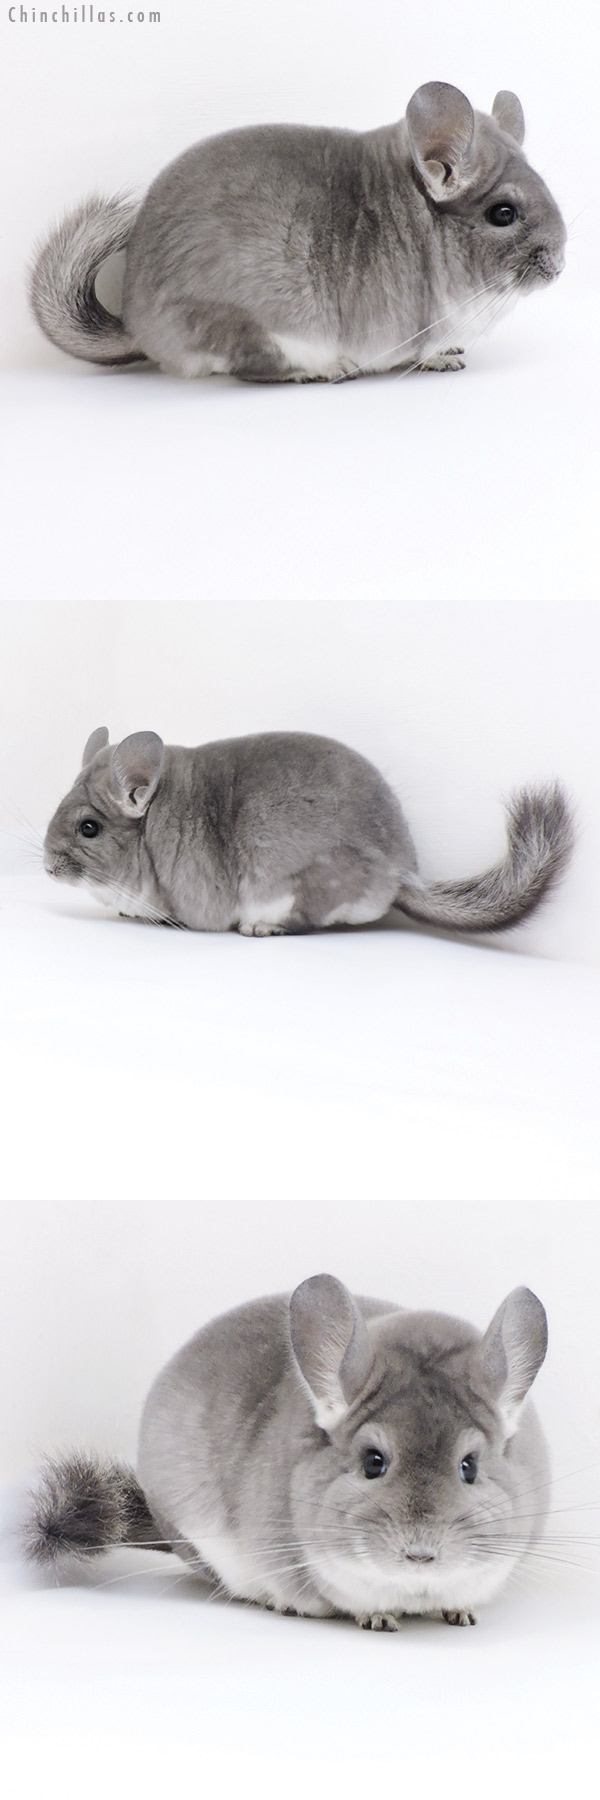 Chinchilla or related item offered for sale or export on Chinchillas.com - 18001 Large Blocky Premium Production Quality Violet Female Chinchilla